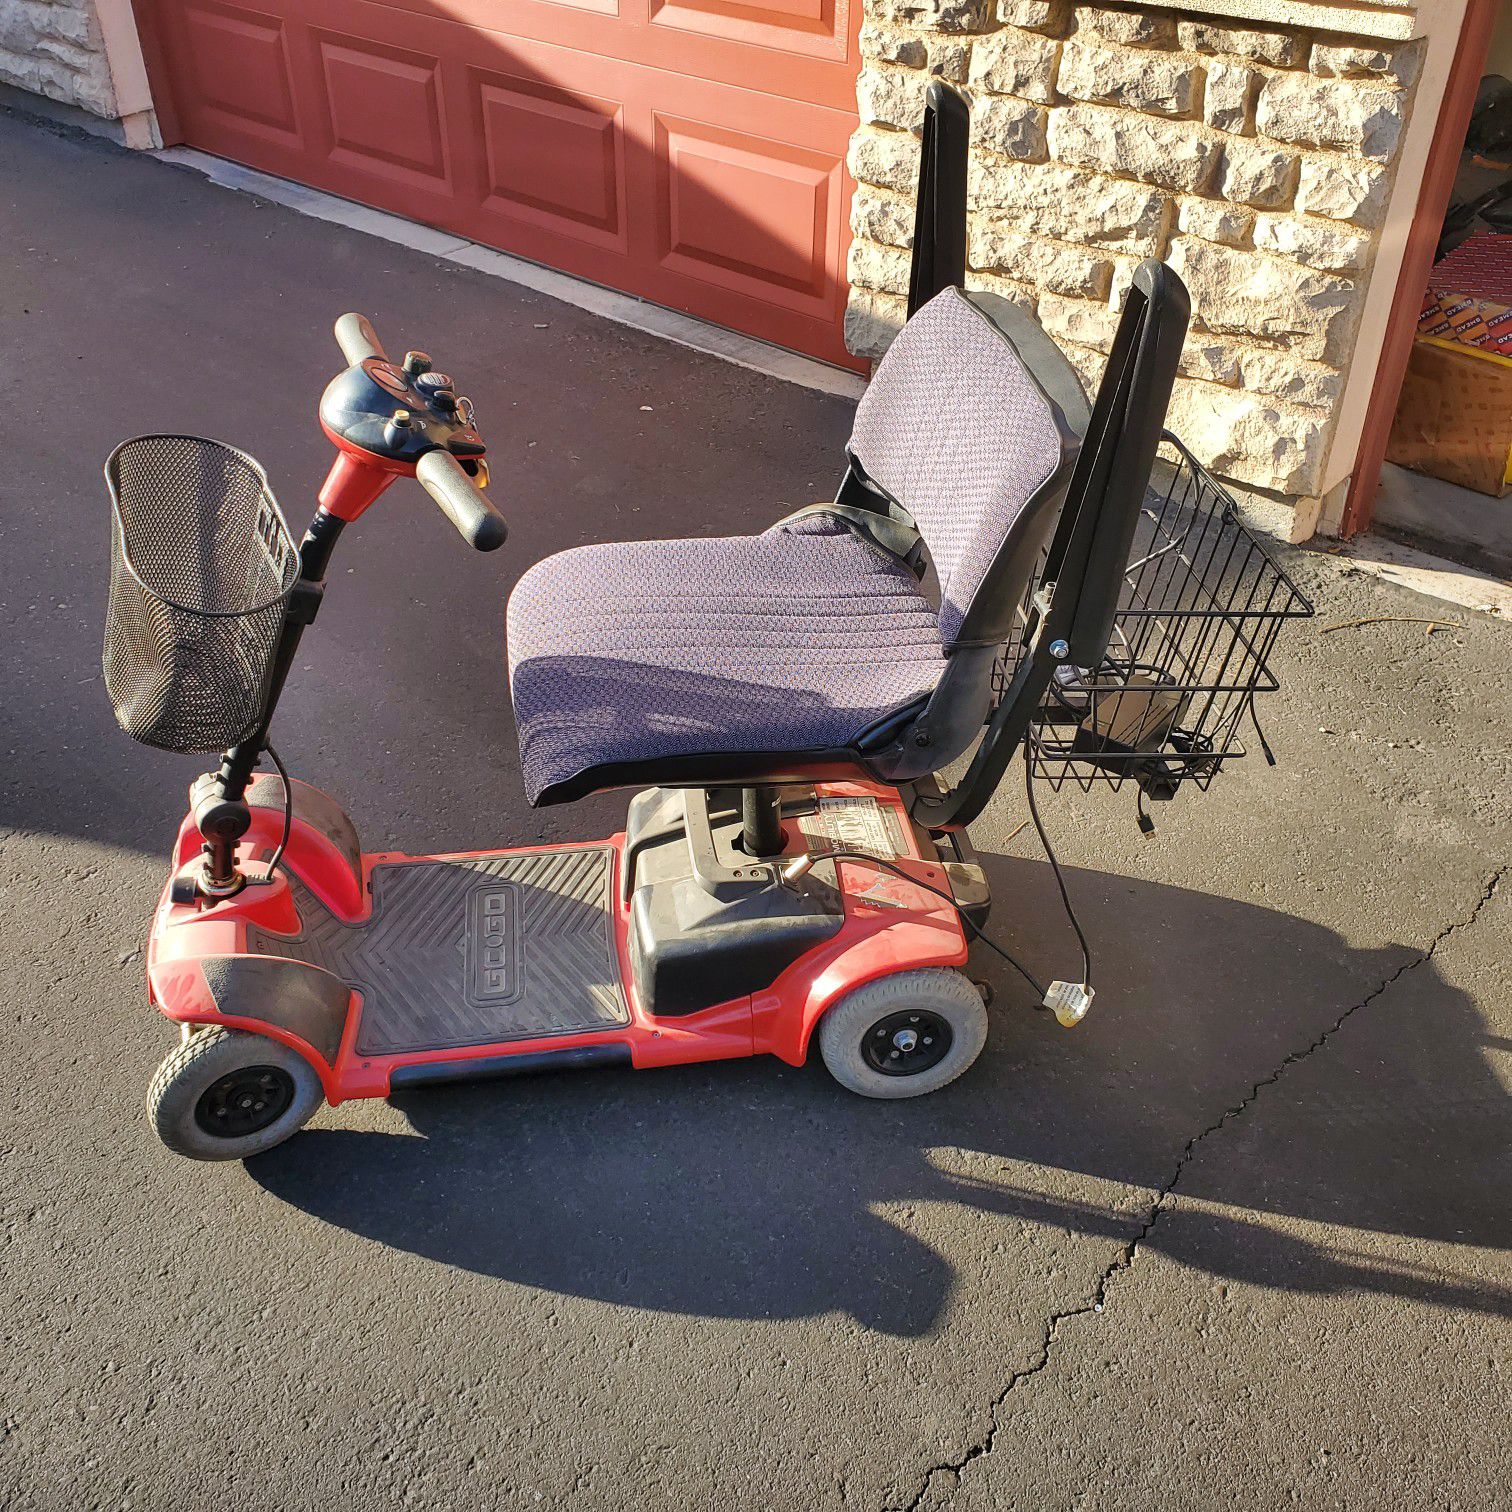 Mobility scooter for best offer. Just stopped working